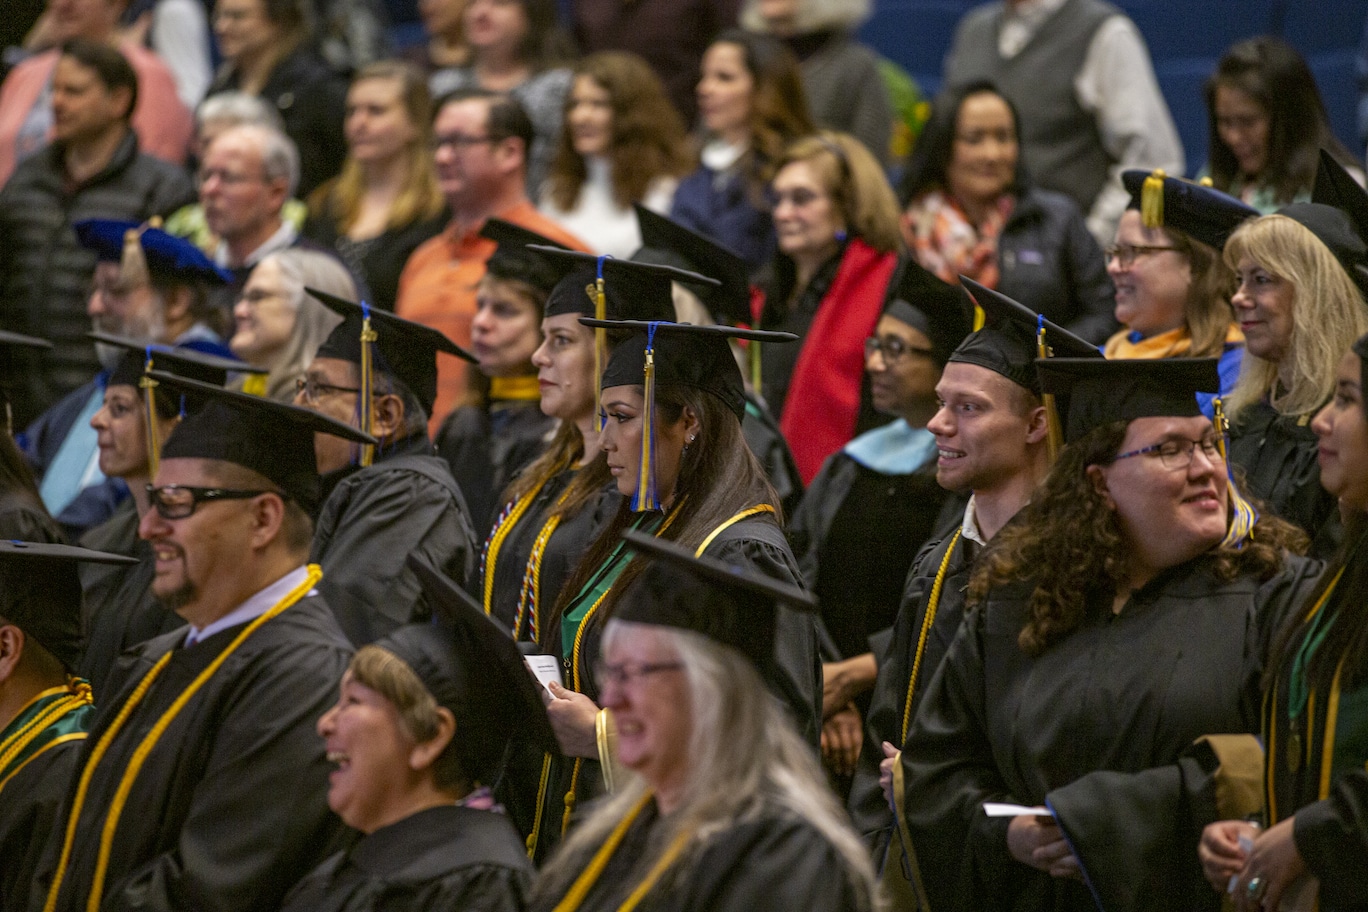 APU grads walk in the fall 2019 Commencement ceremony at the Wendy Williamson Auditorium on the campus of the University of Alaska, Anchorage on December 14, 2019.